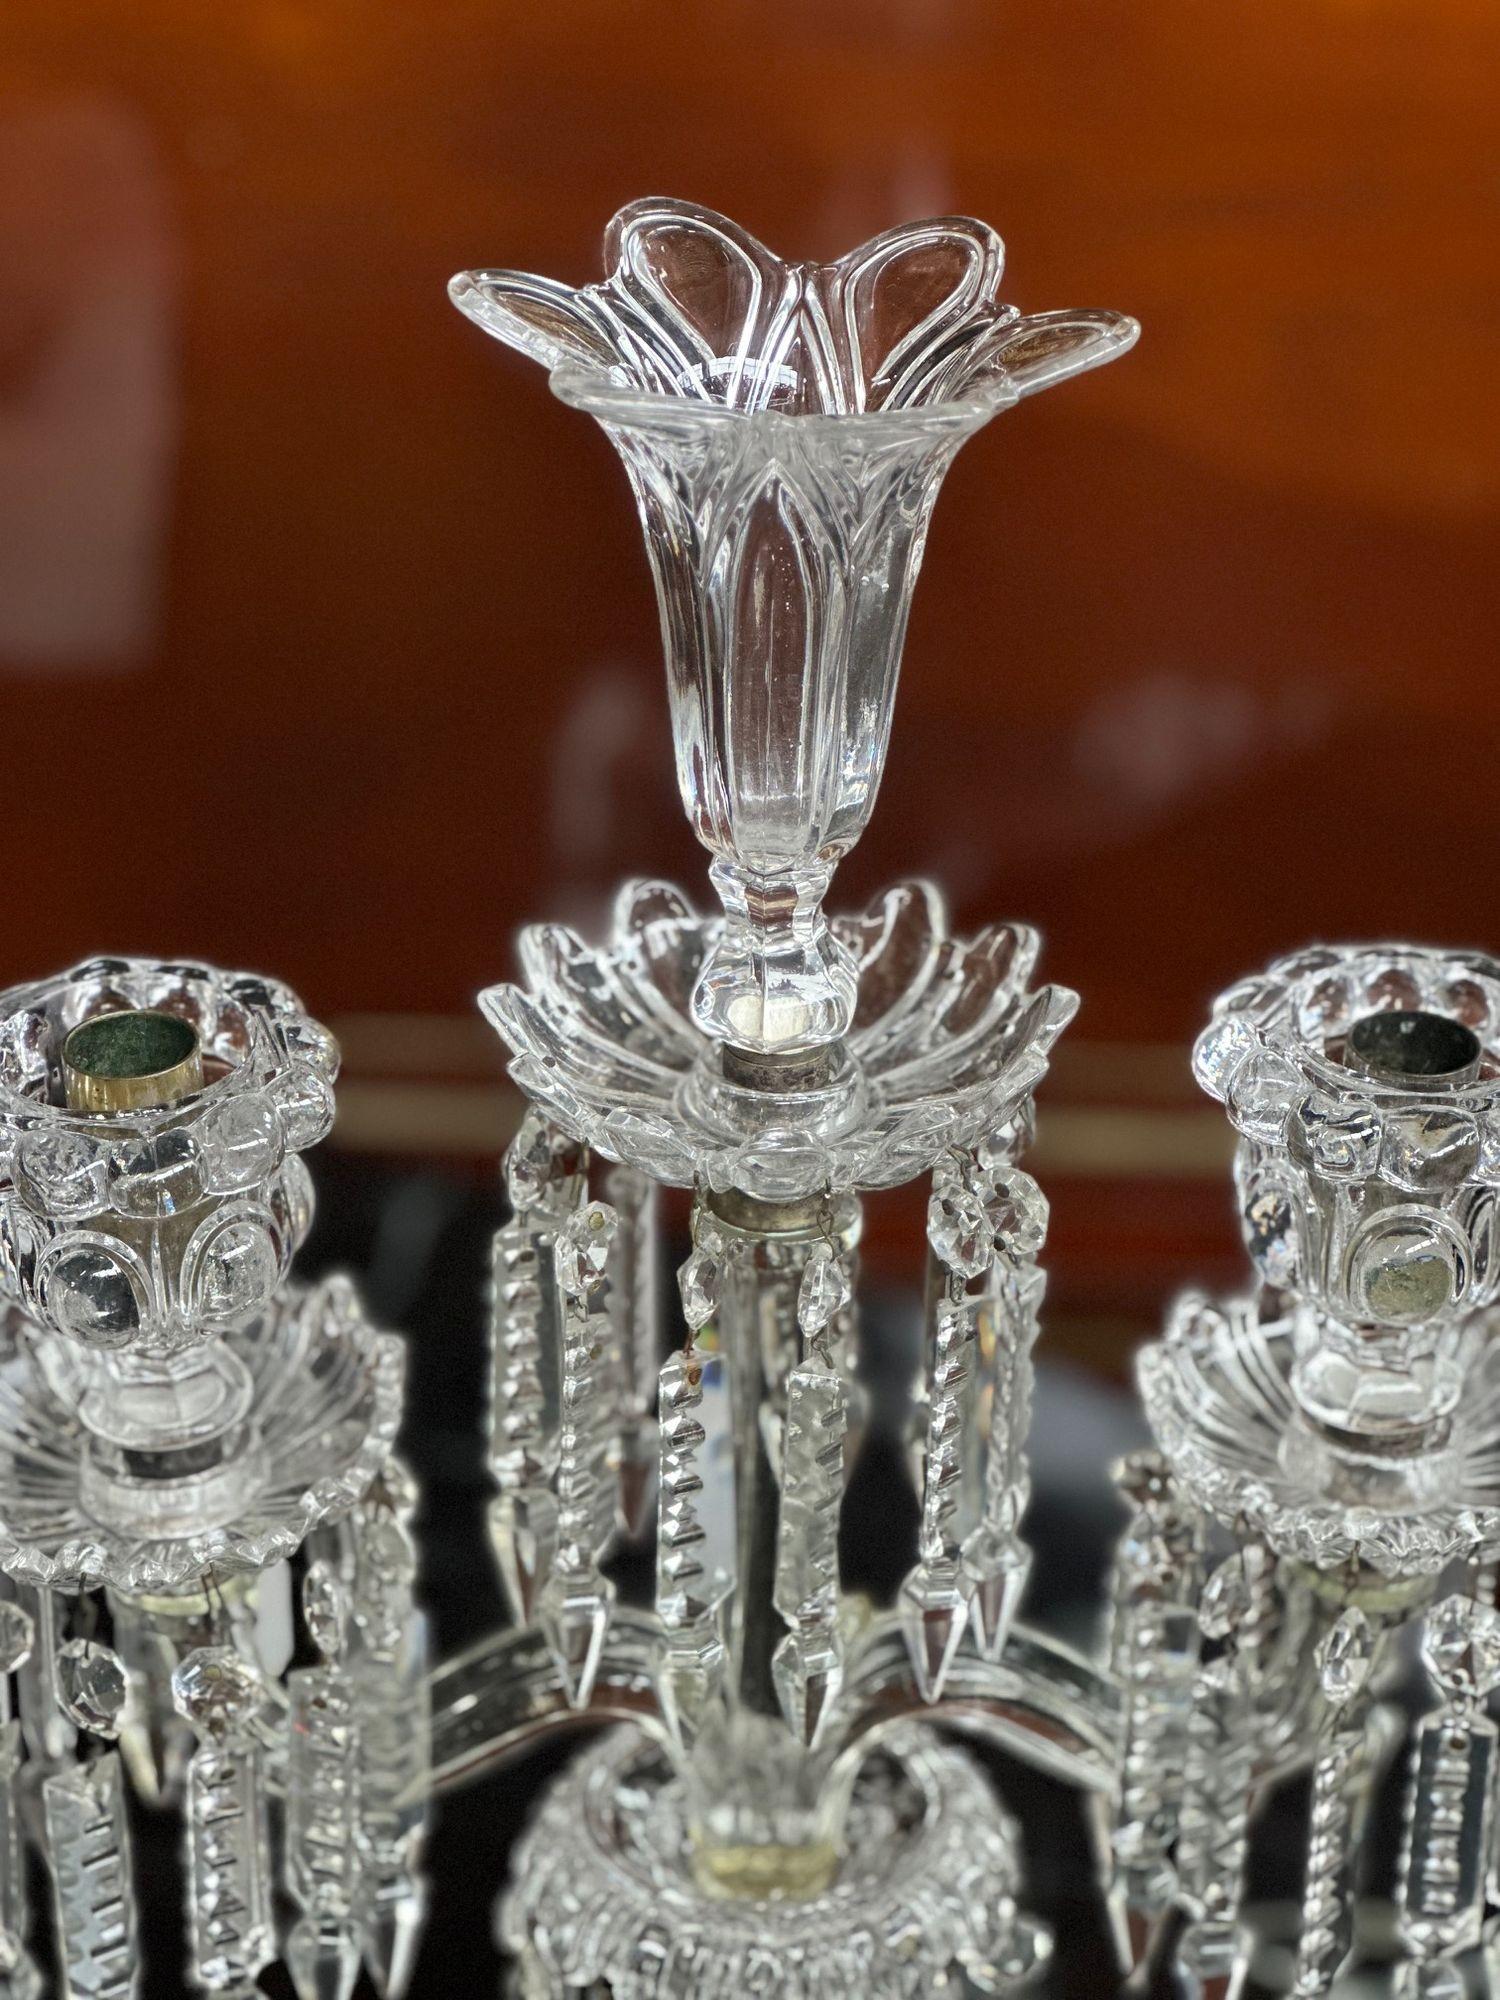 Pair of glass obelisk candelabras by Baccarat with scalloped bases. Made in France, late 19th century.
Dimensions:
23.5